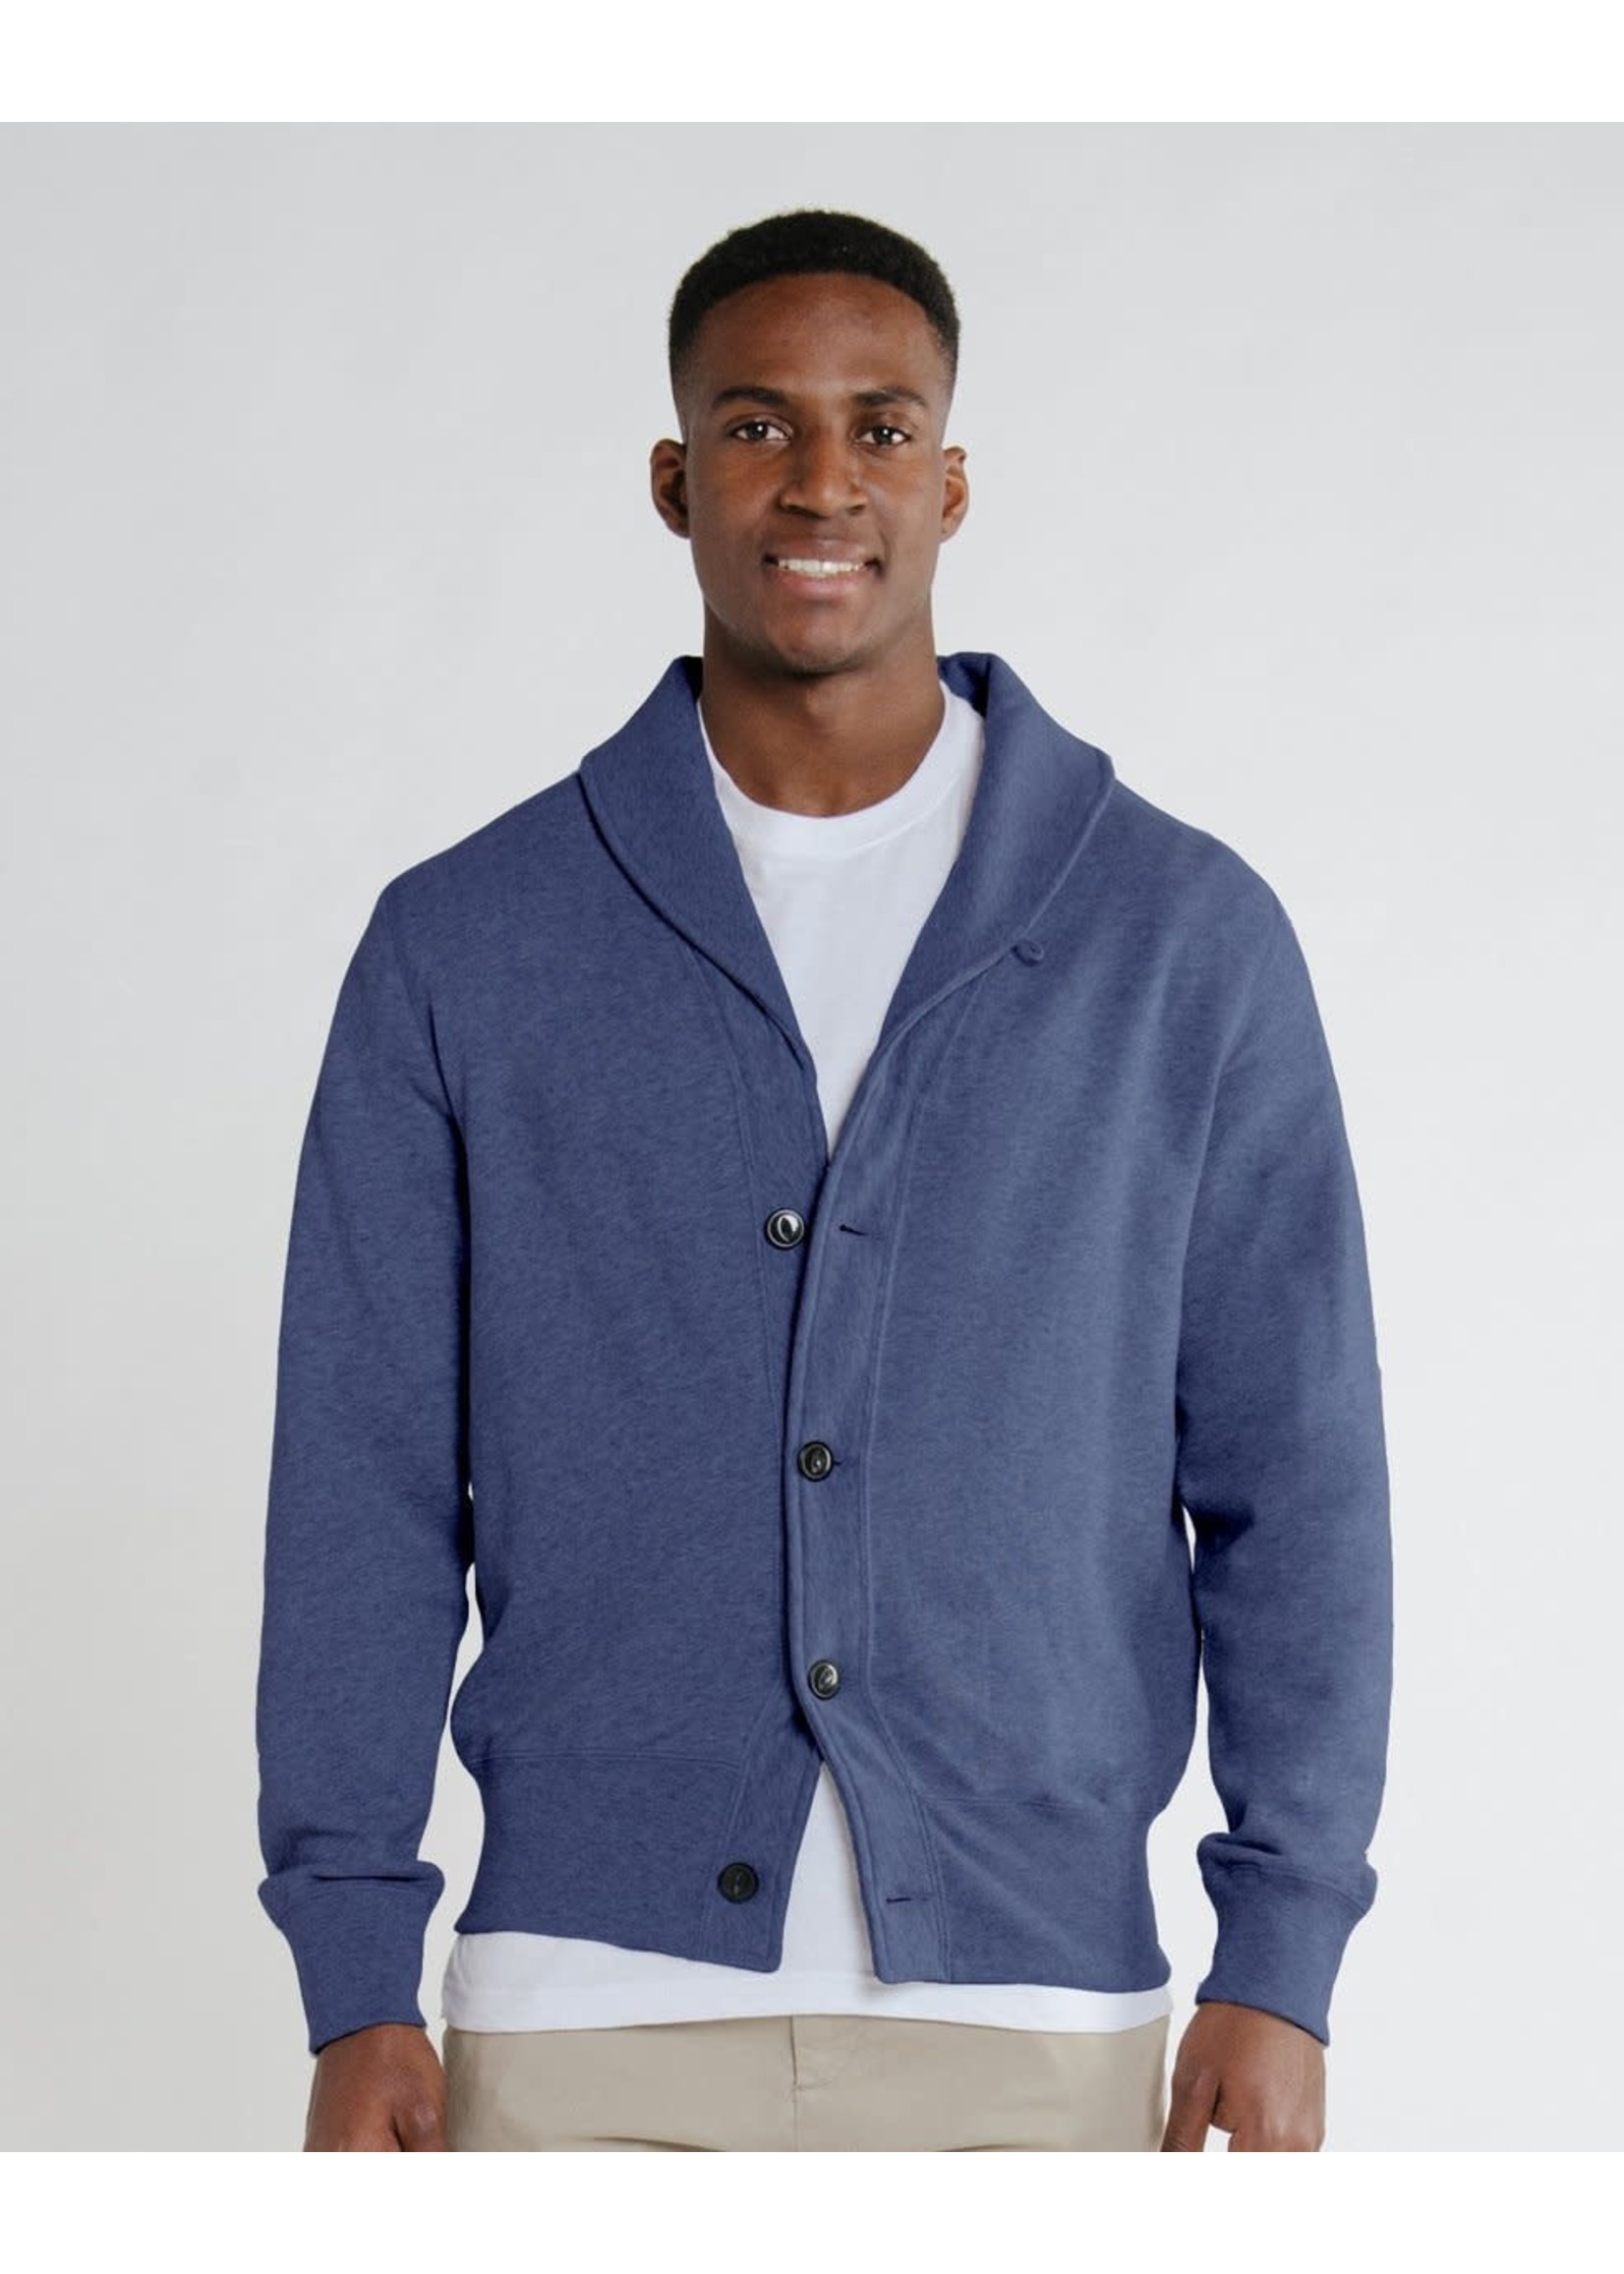 Redwood Classics Canada The "Hector" Heritage Edition Cardigan by Redwood Classics